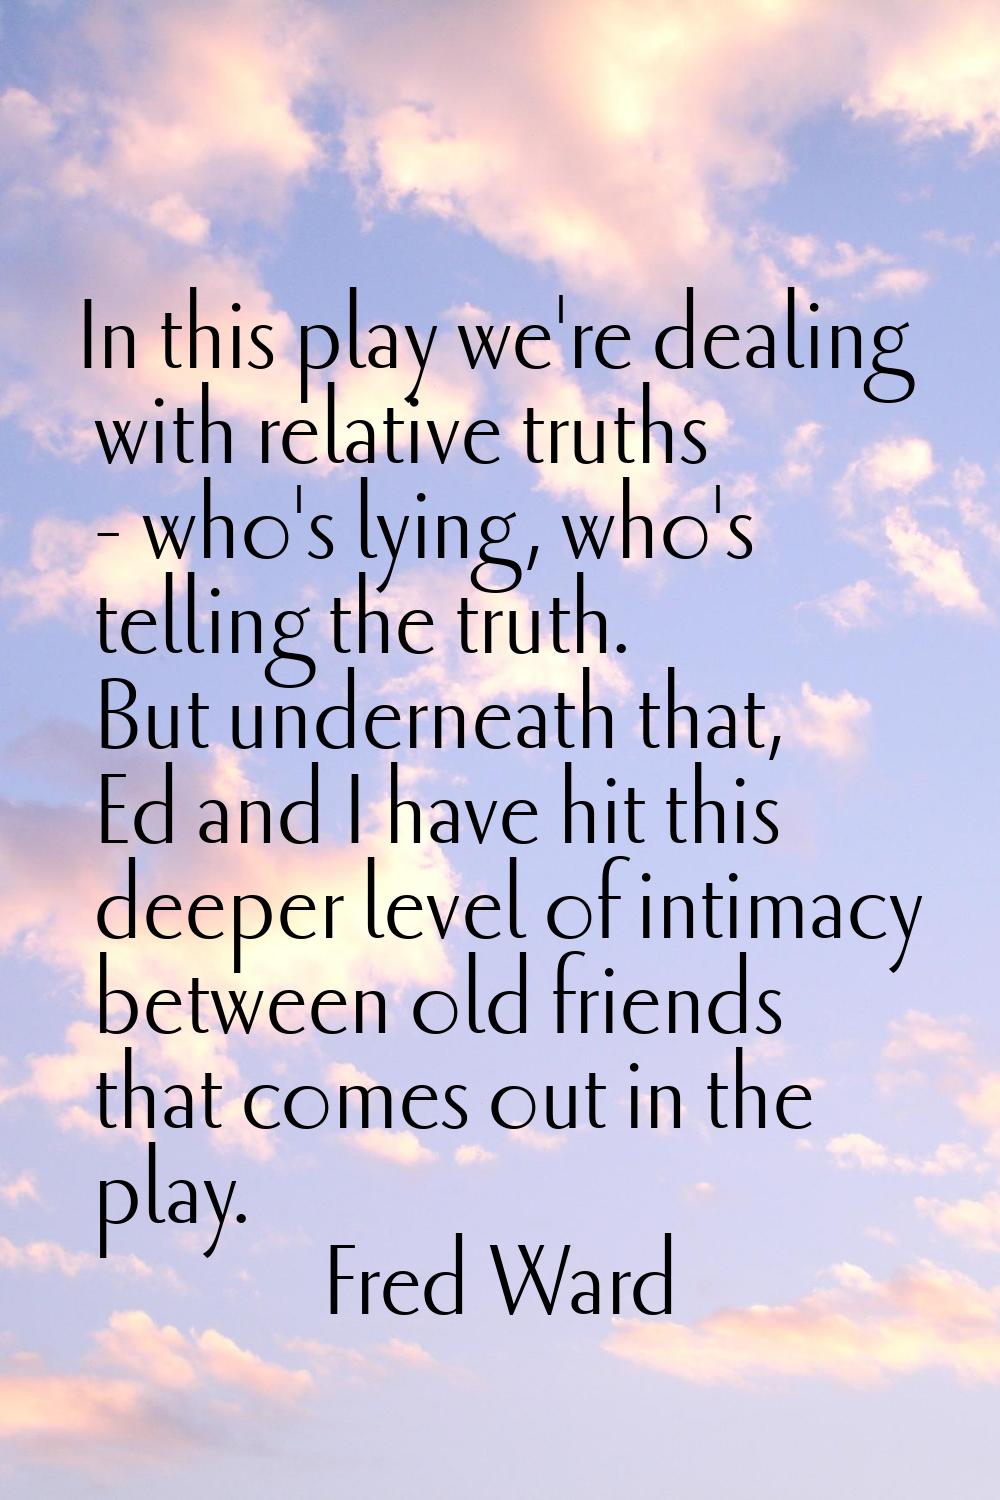 In this play we're dealing with relative truths - who's lying, who's telling the truth. But underne